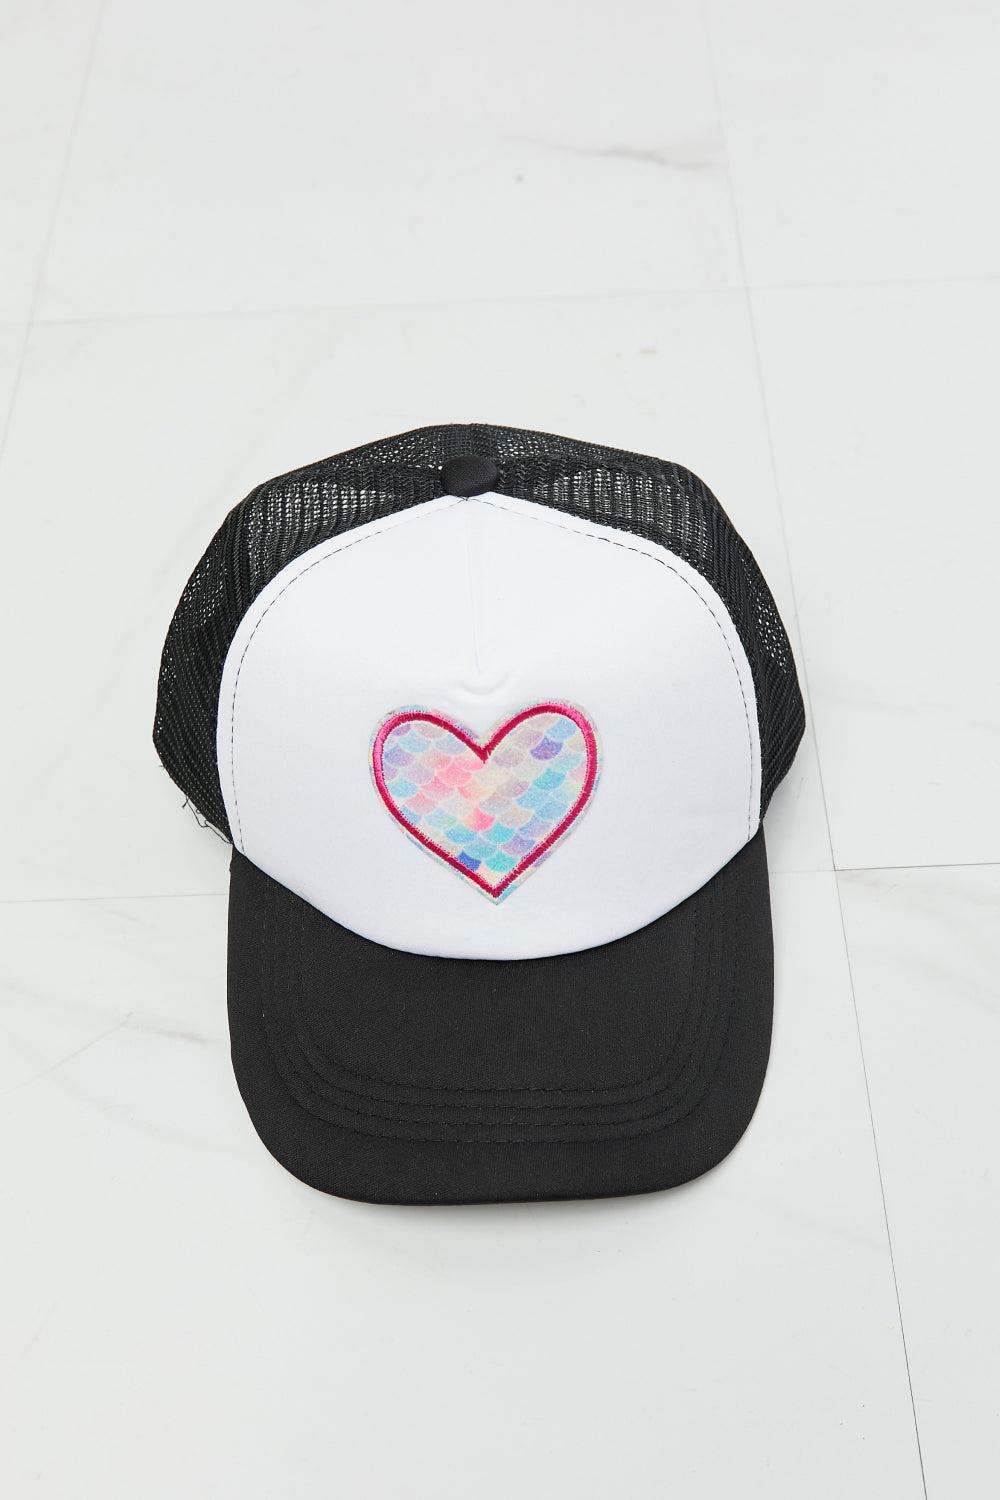 Fame Falling For You Trucker Hat in Black BLUE ZONE PLANET